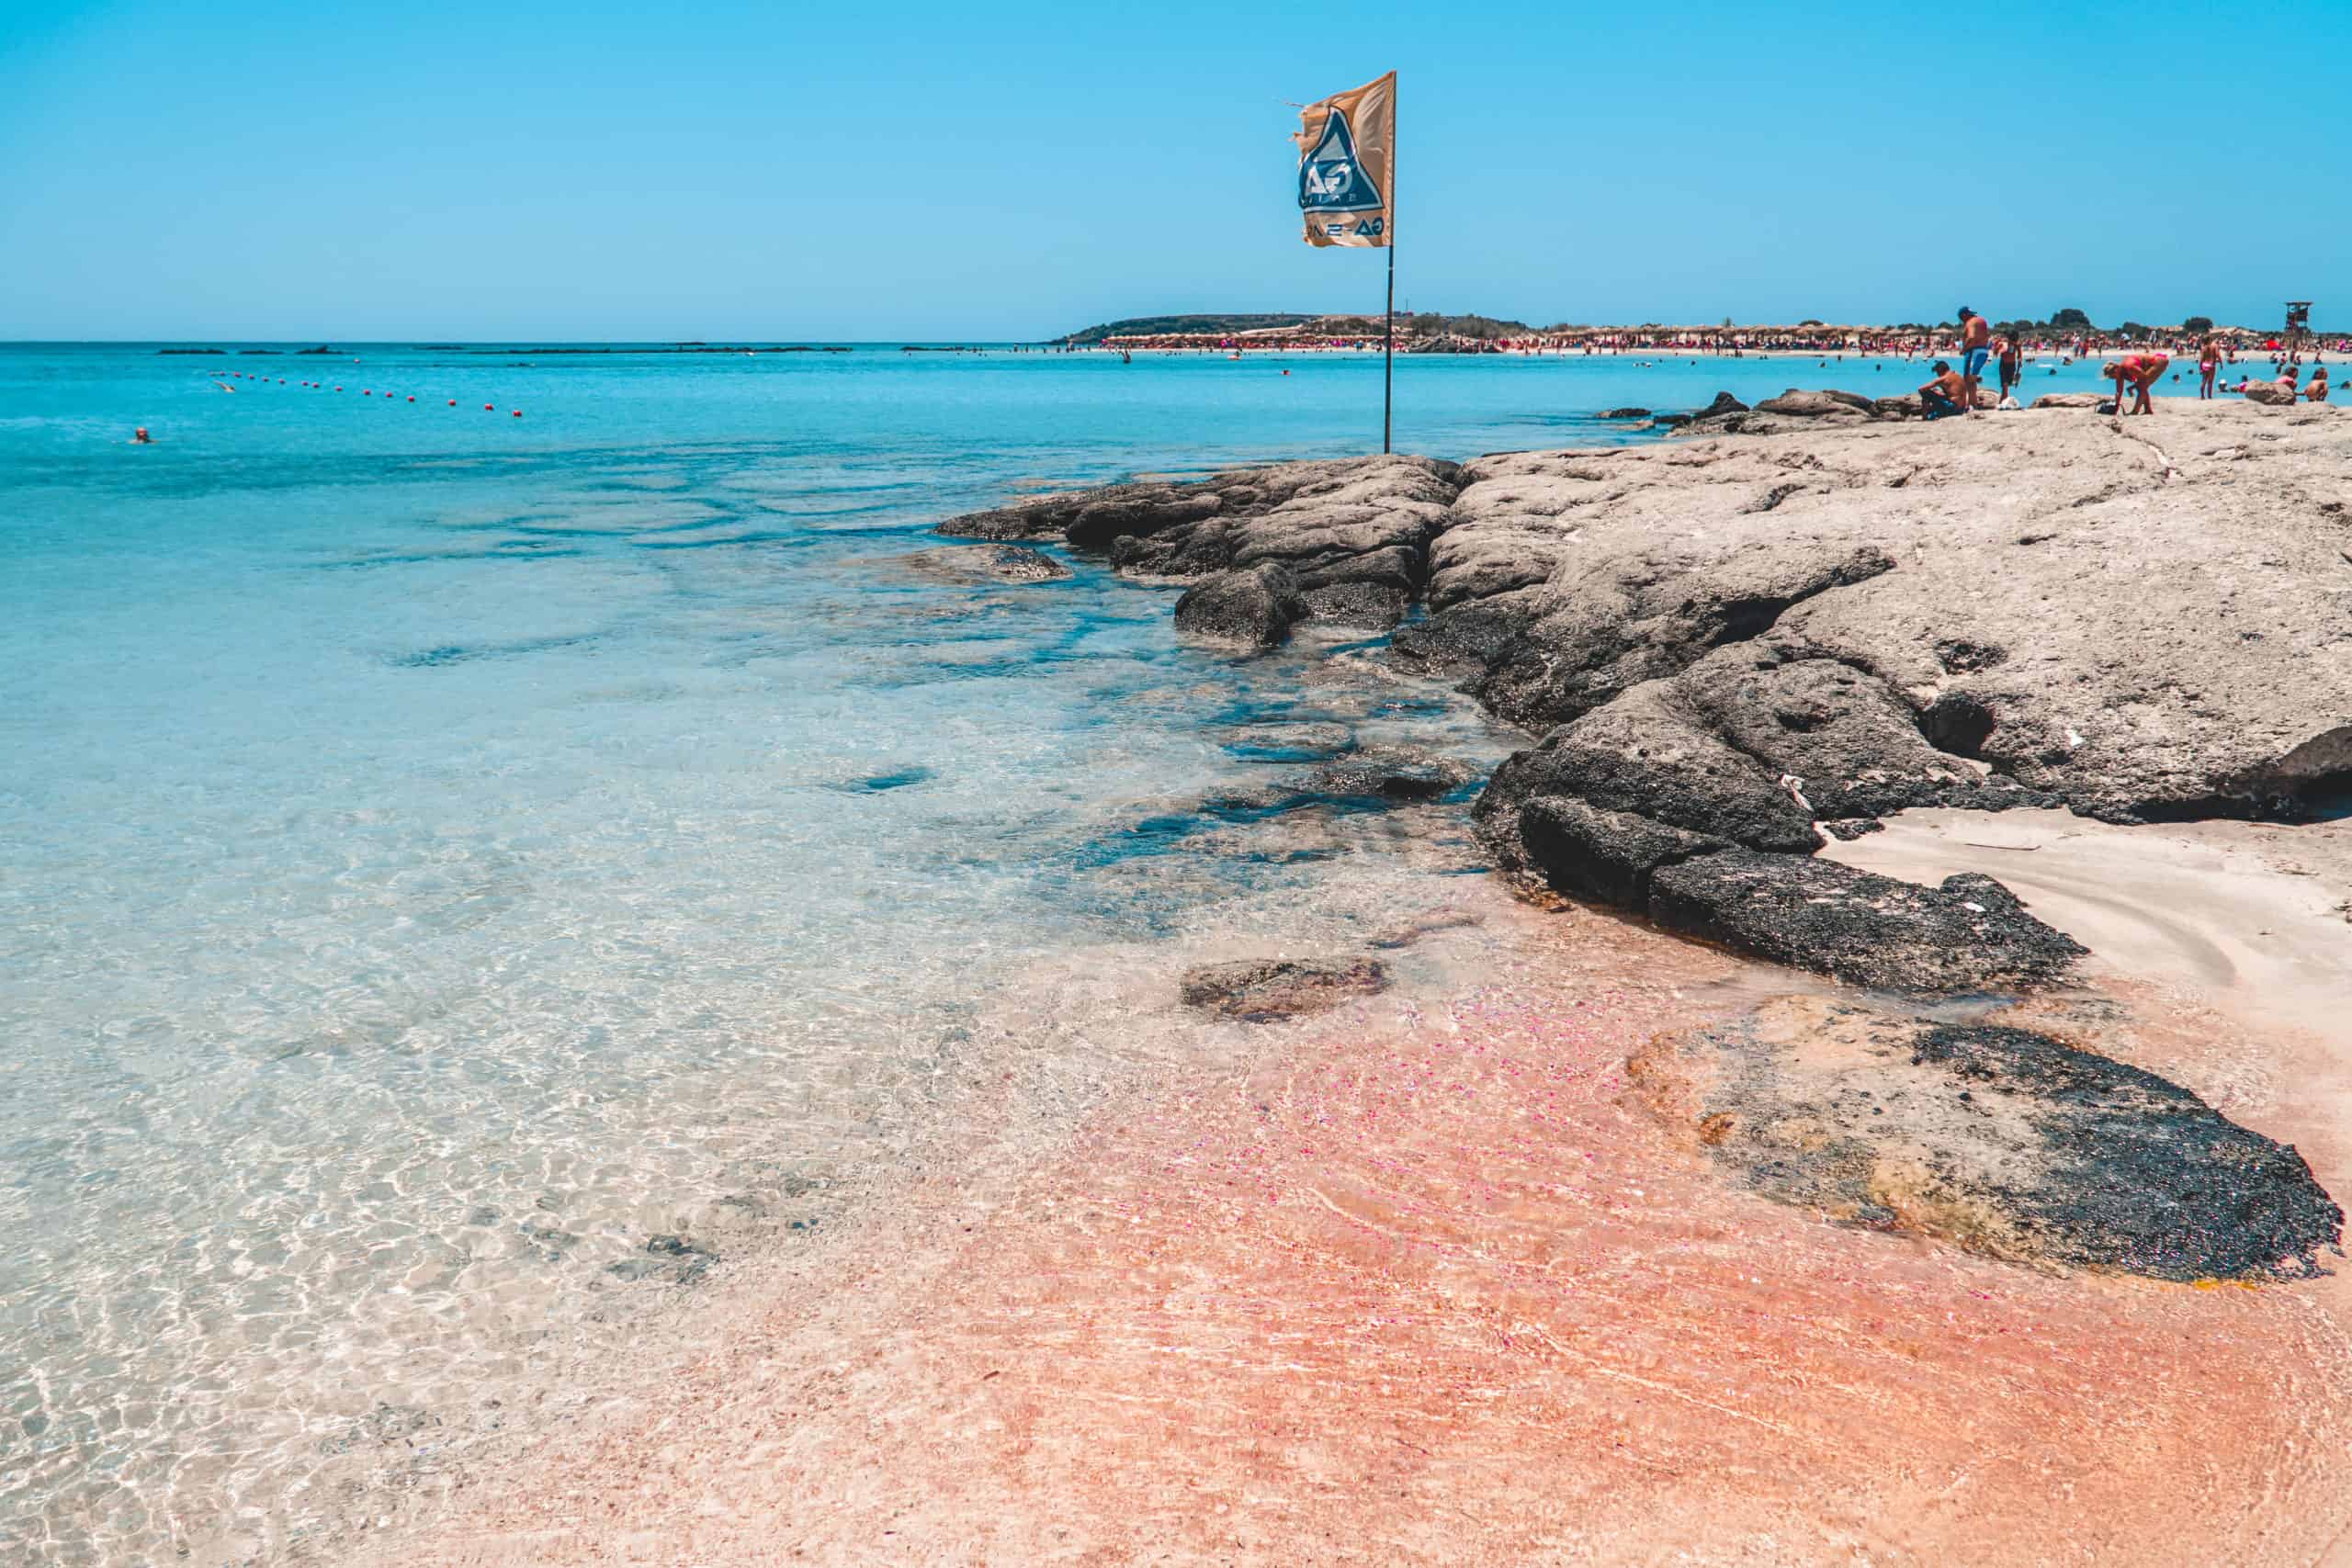 Pink sand at Elafonissi Beach in Crete